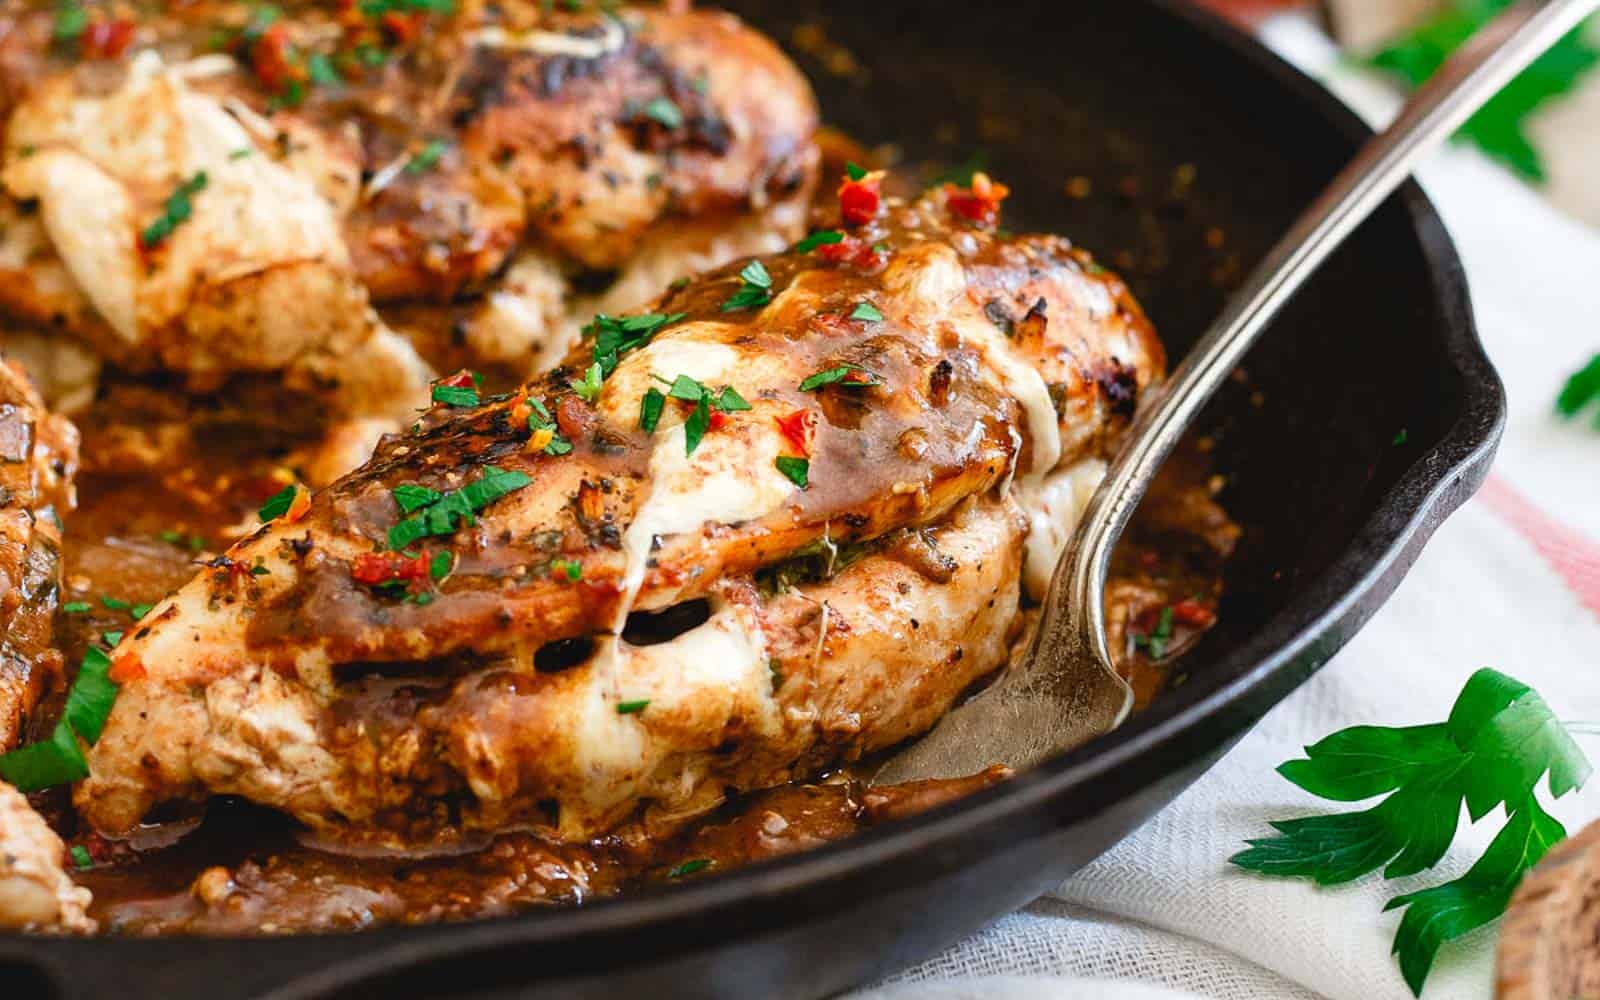 <p>Elevate your Sunday with this stuffed chicken marsala, brimming with mozzarella, tomato butter, and basil. It adds sophistication to your meal, perfectly fitting for a cozy and impressive Sunday dinner.<br><strong>Get the Recipe: </strong><a href="https://www.runningtothekitchen.com/stuffed-chicken-marsala/?utm_source=msn&utm_medium=page&utm_campaign=RTTKmsn">Stuffed Chicken Marsala</a></p>